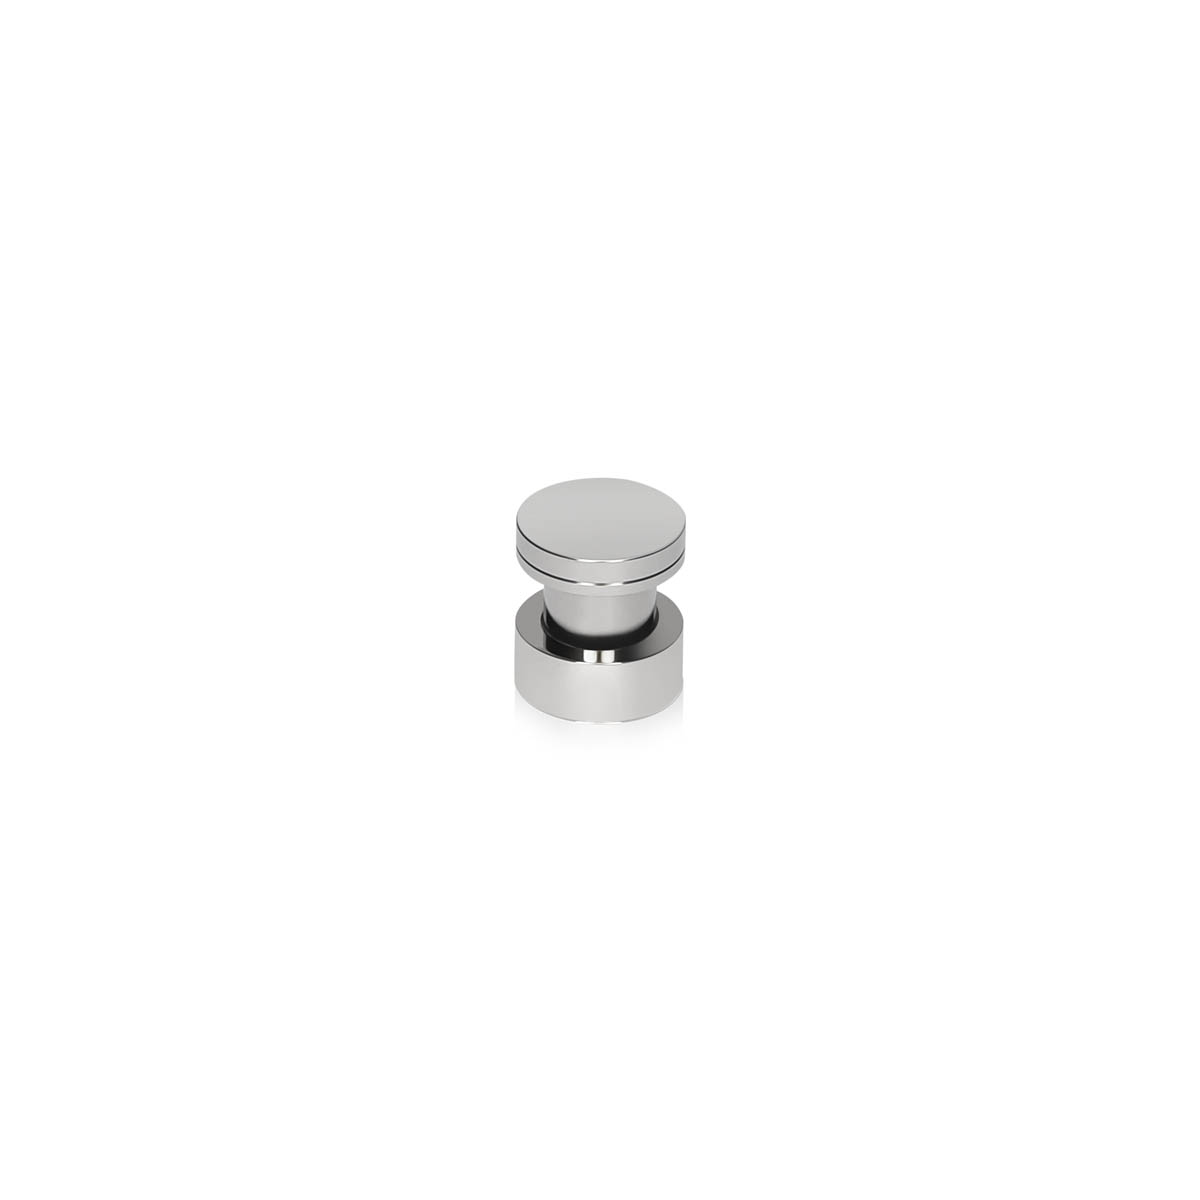 3/4'' Diameter X 5/16'' Barrel Length Stainless Steel (316) Panel Mount Standoffs, Flat Head Polished Finish (for Inside or Outside Use) Material Thick. Accepted 5/16'' to 3/8'' [Required Material Hole Size: 9/16'']